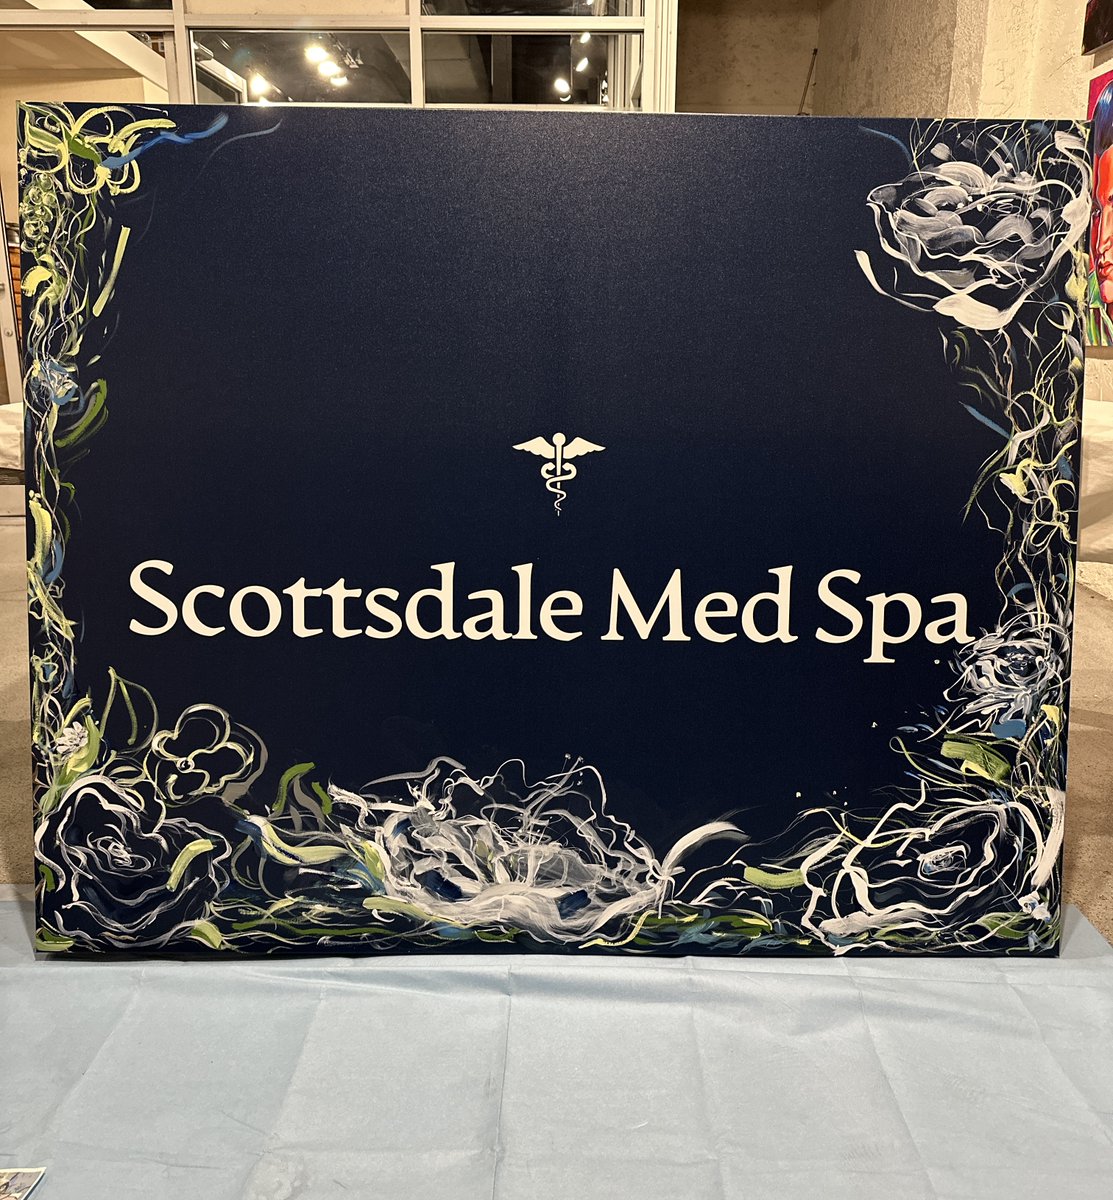 Loved creating this painting for 'Scottsdale Medical Spa'  Mission Accomplished!
Grand Opening Event Dec. 7th, 6-8:30 pm
7045 E 3rd Ave. Scottsdale in Old Town.  Can't wait to celebrate! #scottsdale #interiordesign #art #artwork #cynsilvaart #artist #interiordesigner